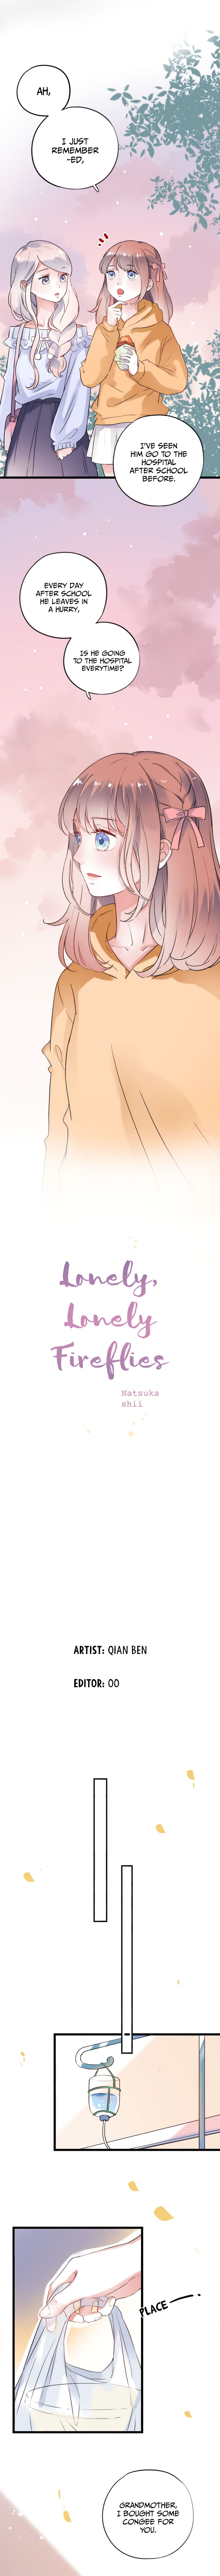 Lonely, Lonely Fireflies Ch. 29.2 He's shy!